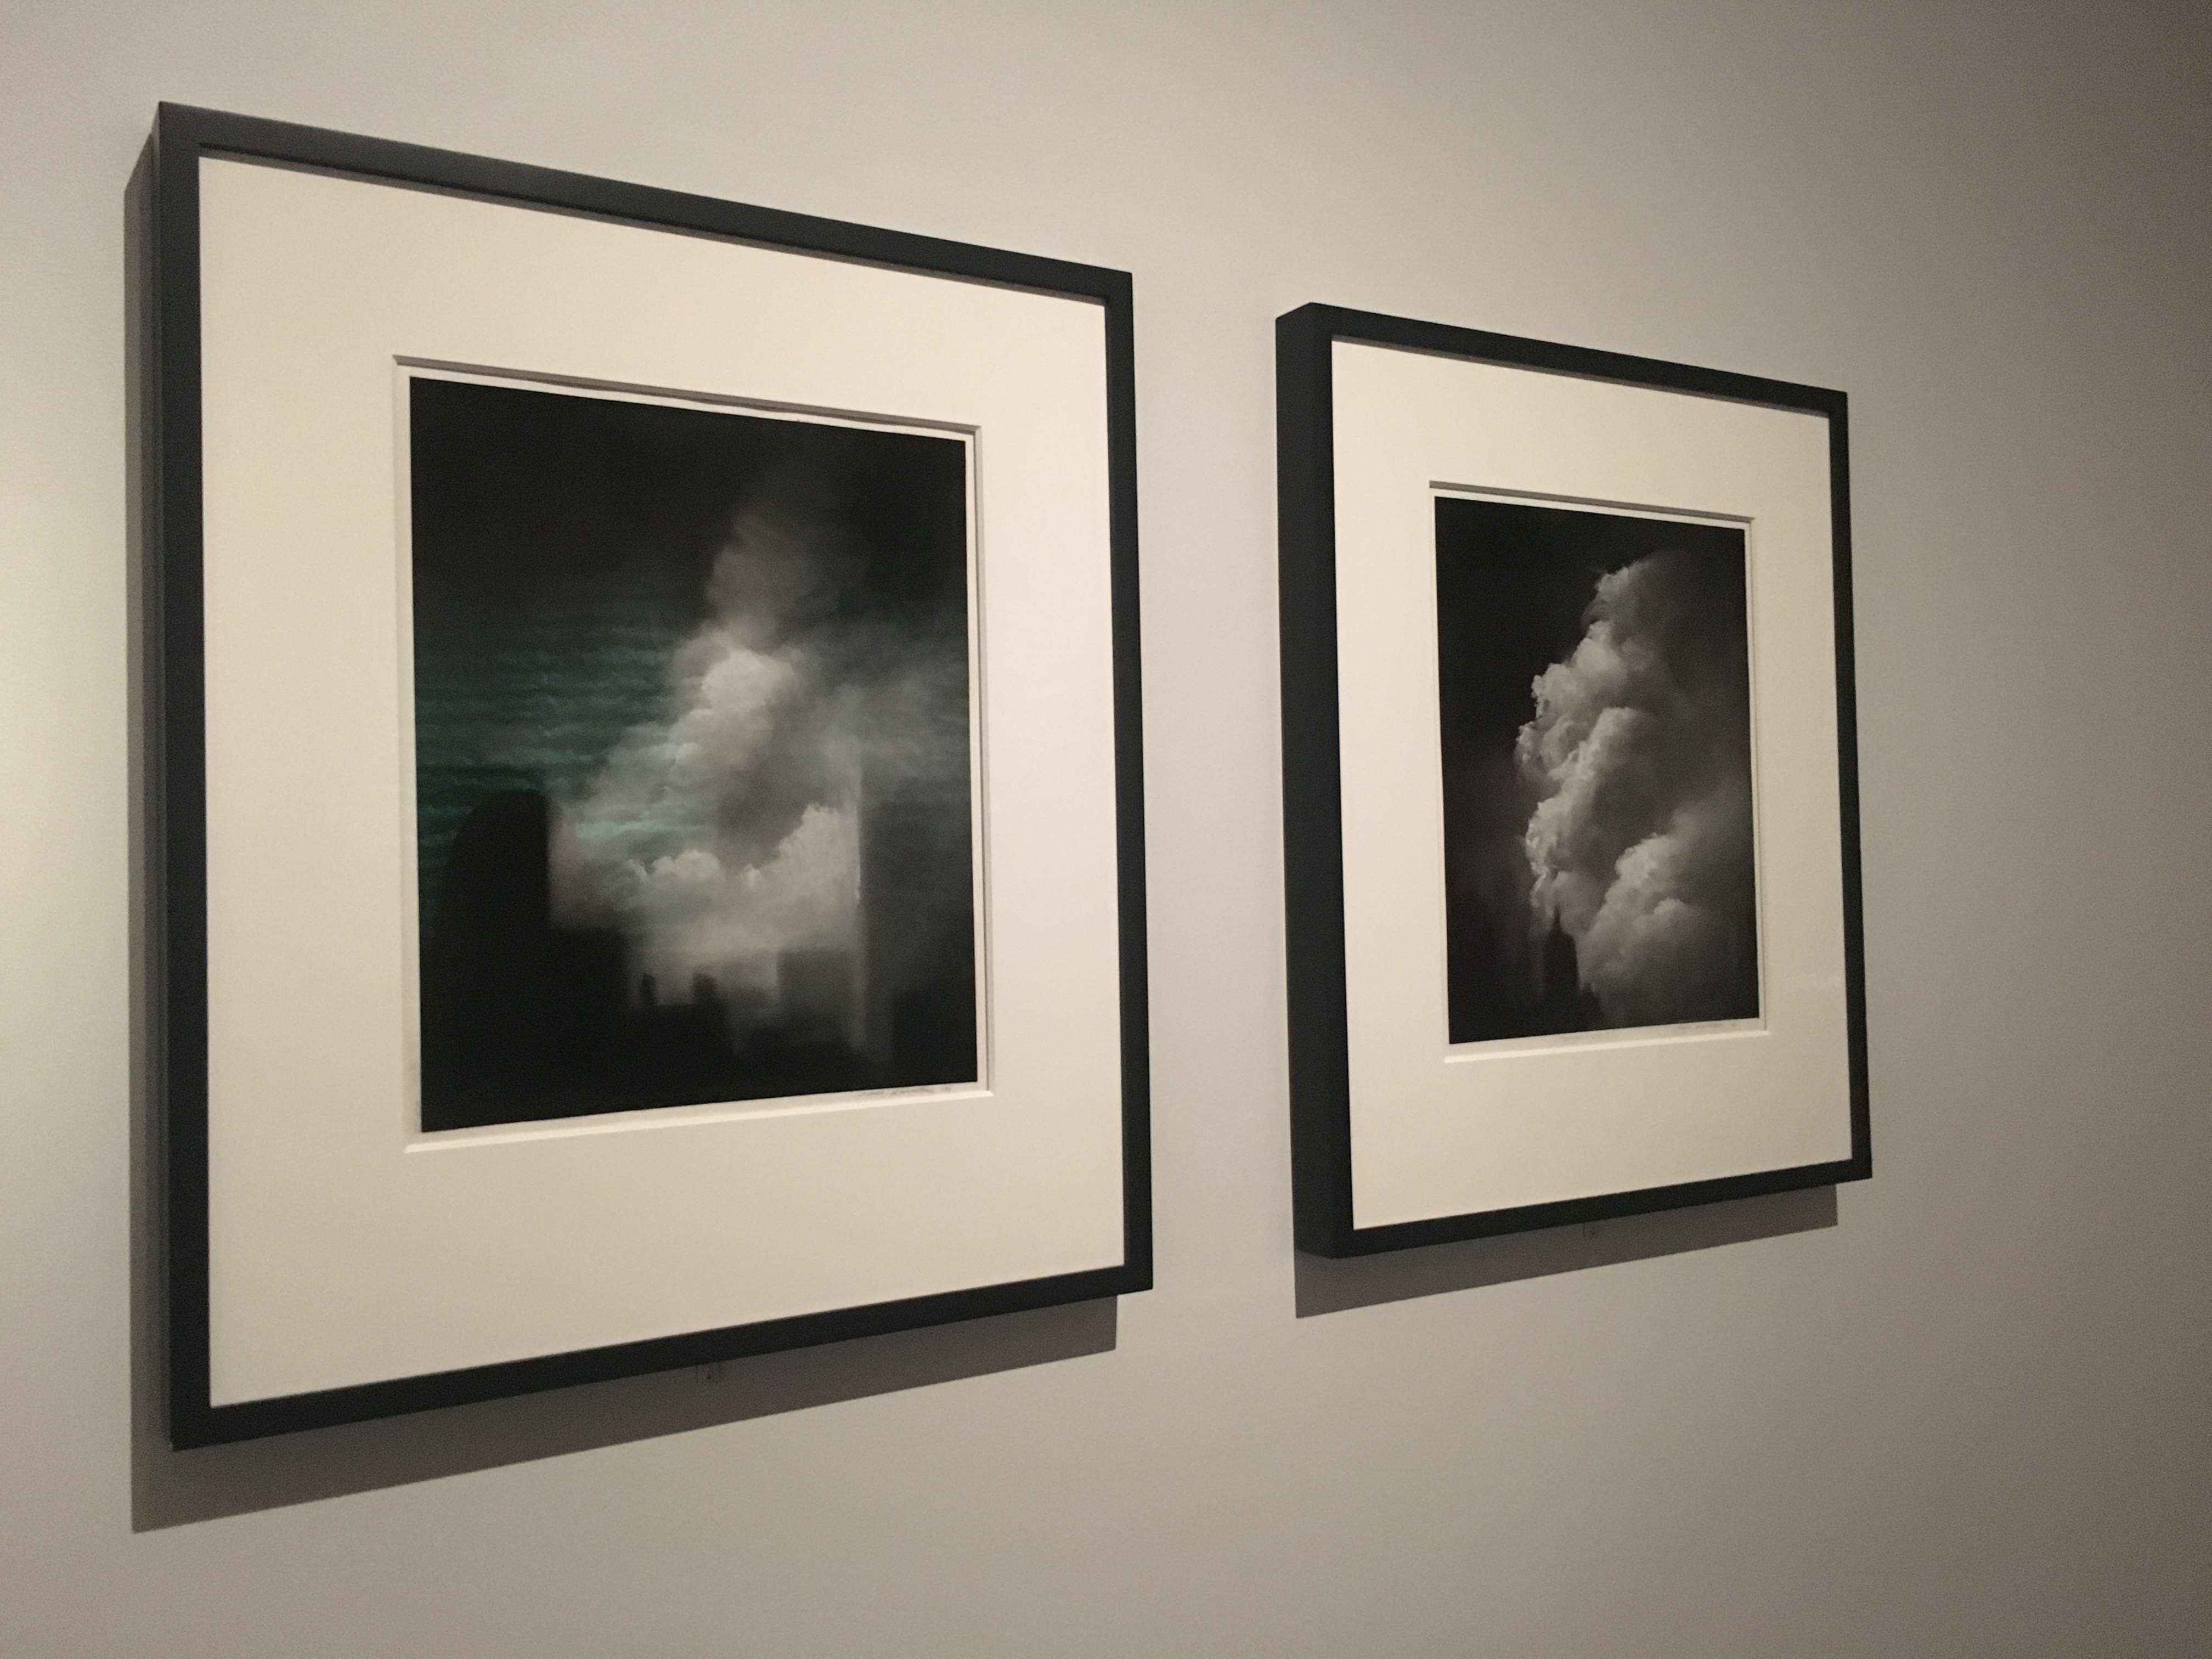 Two framed pieces of art by artist Donna Levinstone are displayed on a white wall. The handmade pastels show plumes of smoke and dust in lower Manhattan.